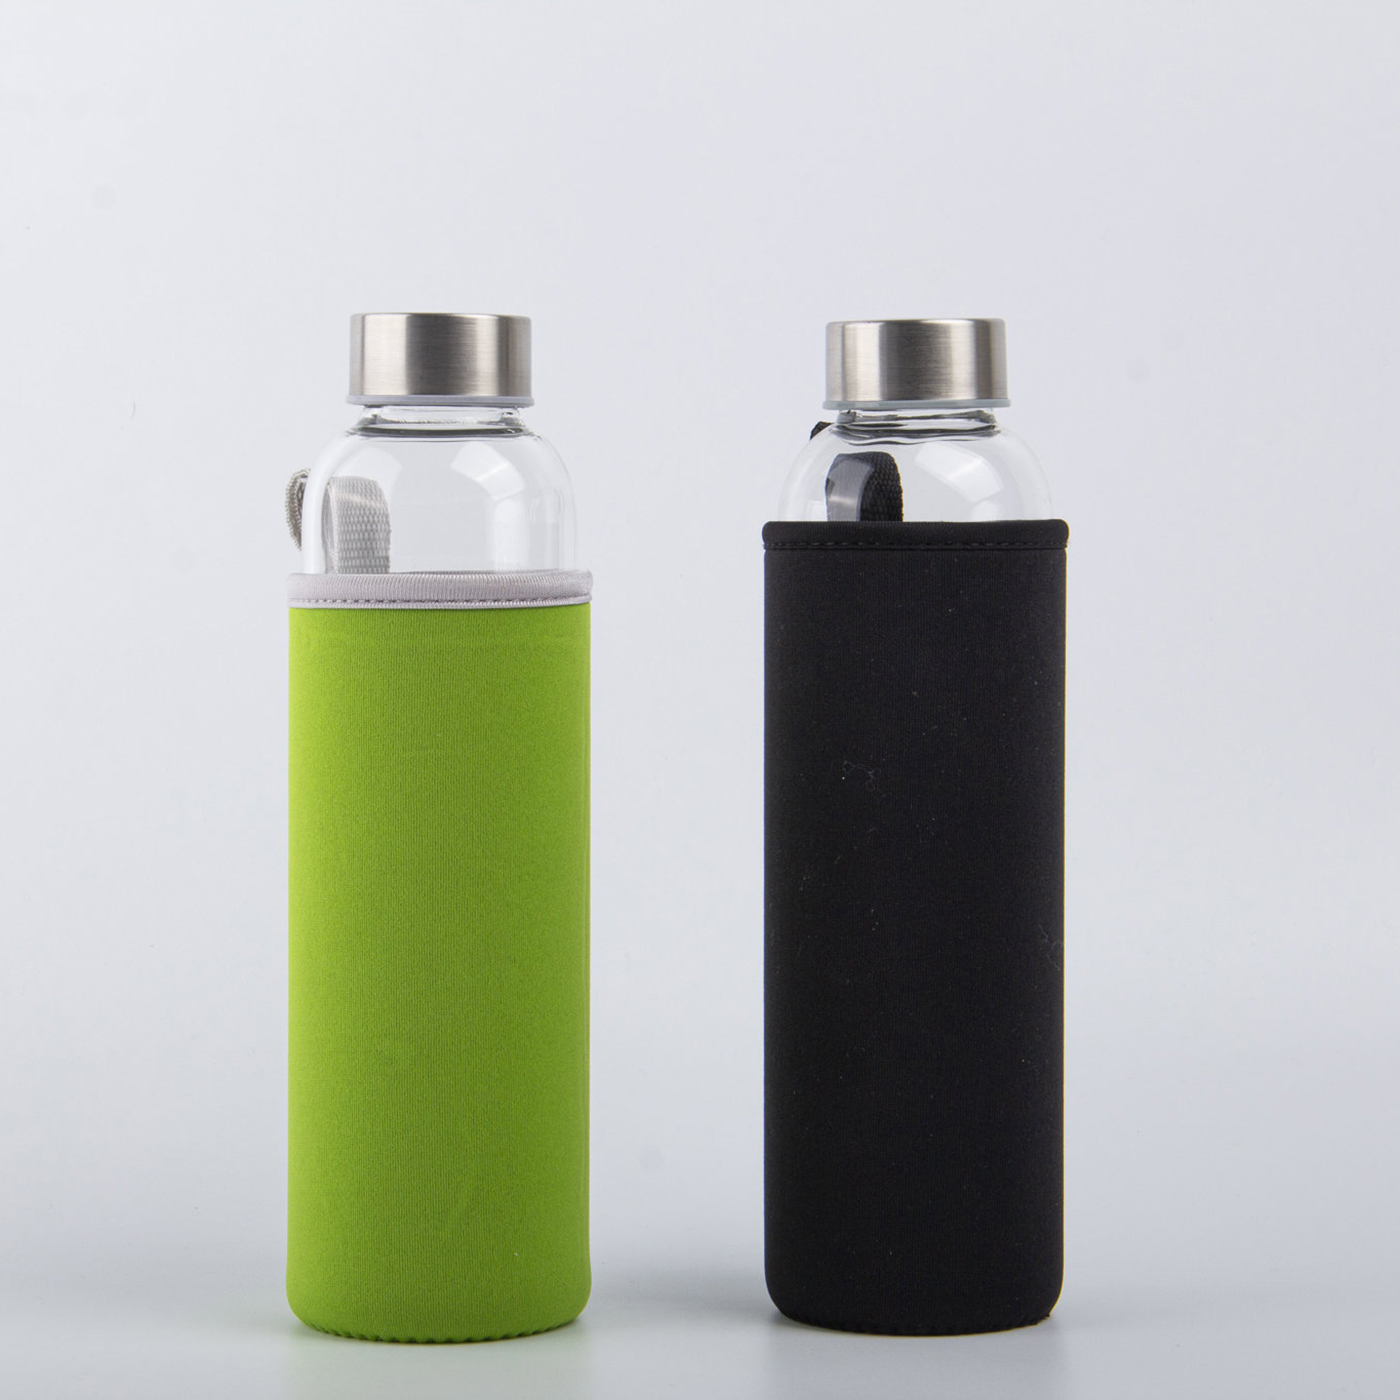 19 oz. Glass Water Bottle With Nylon Sleeve4